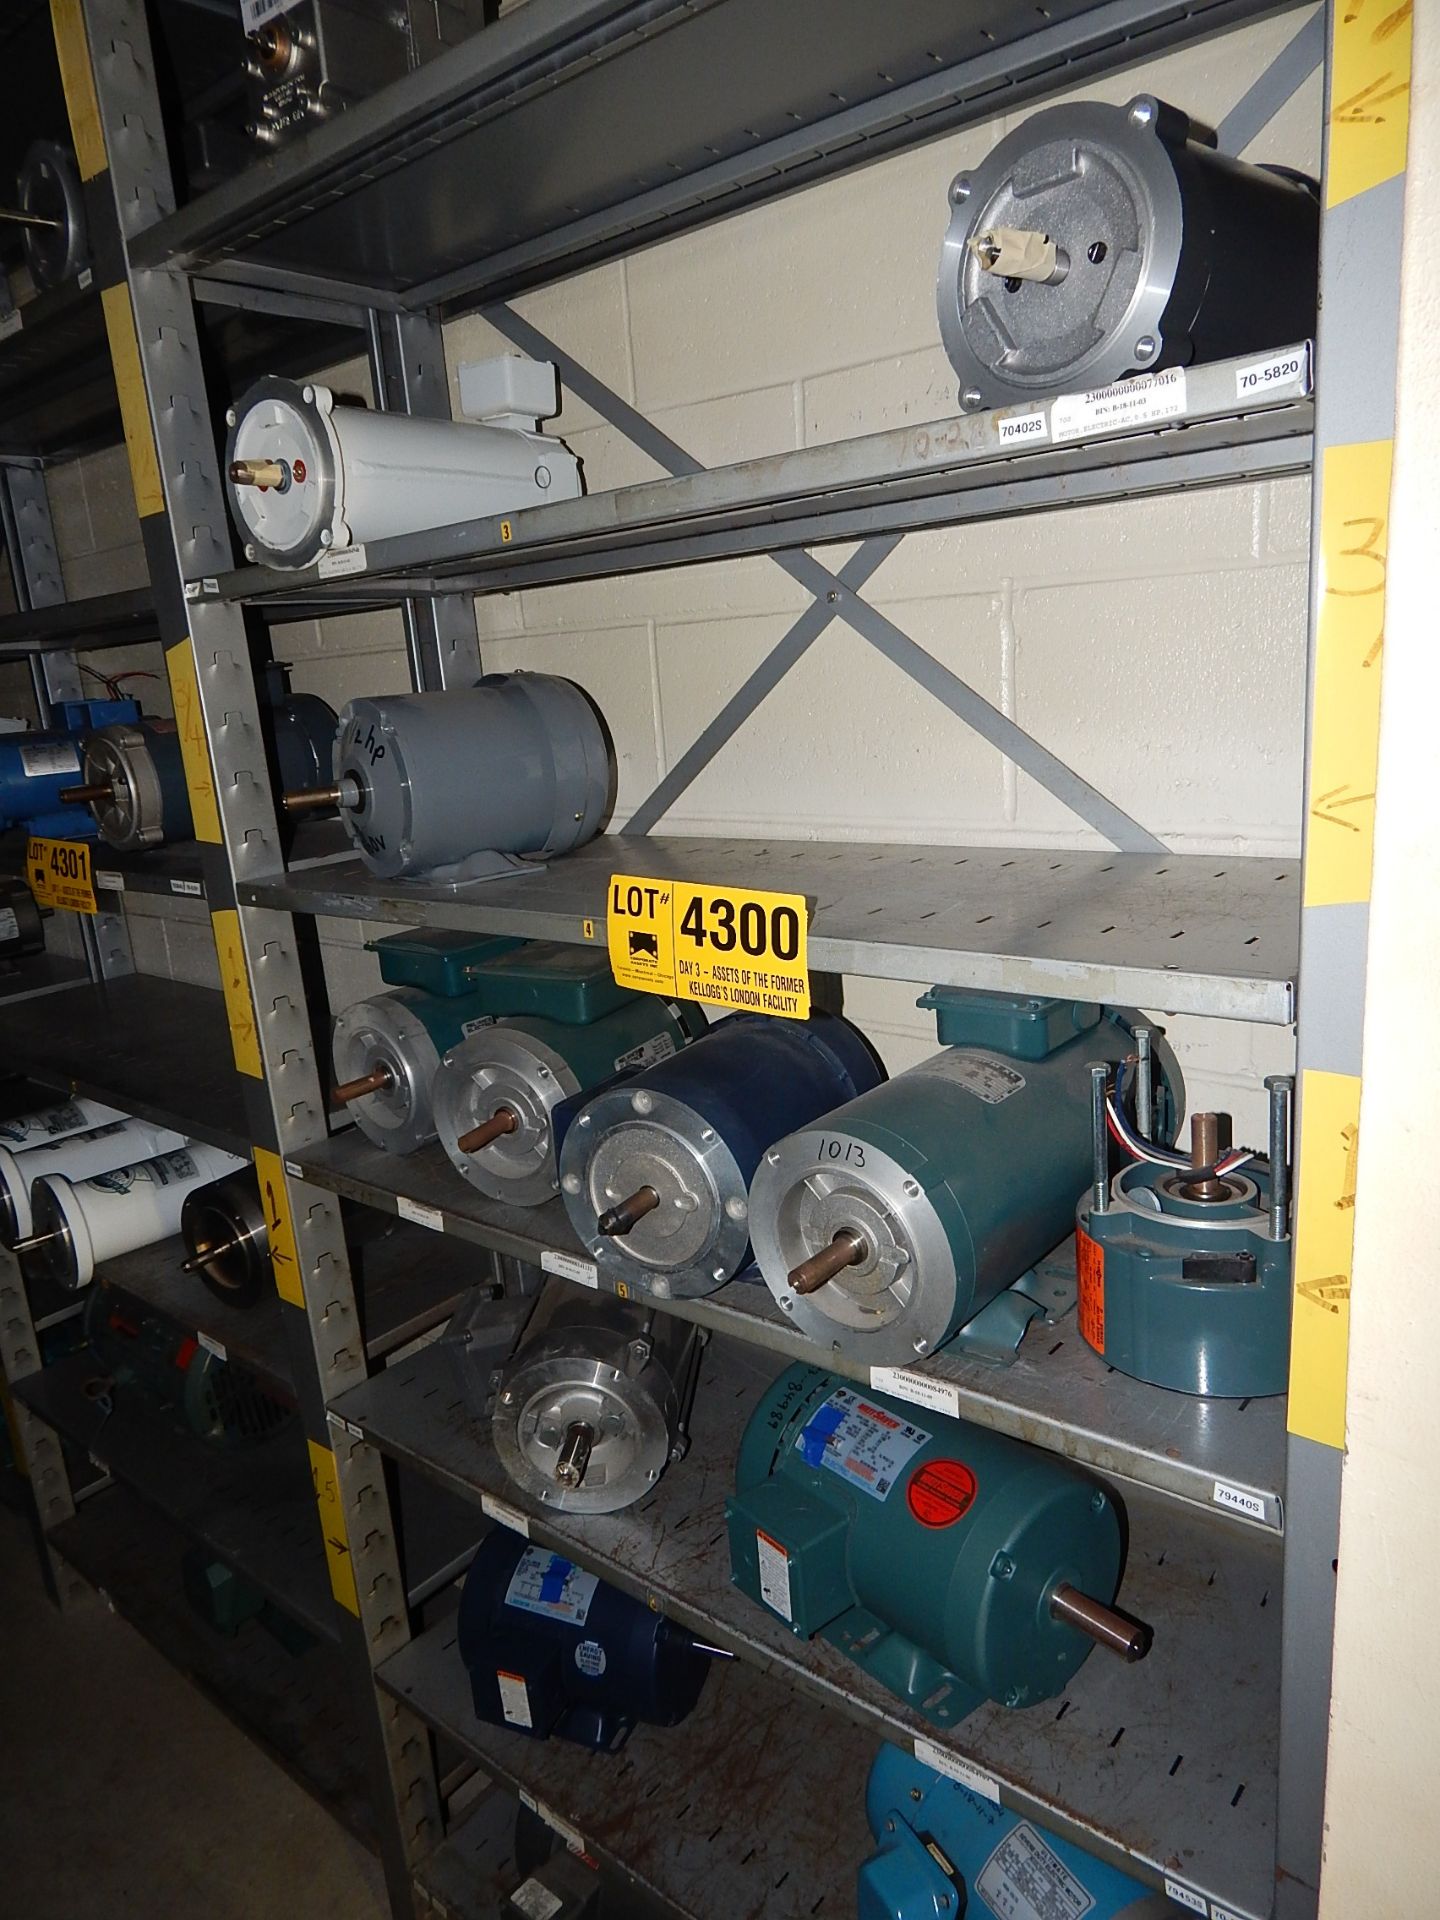 LOT/ CONTENTS OF SHELVING UNIT CONSISTING OF ELECTRIC MOTORS AND GEARBOXES (BUILDING 32, STORES)